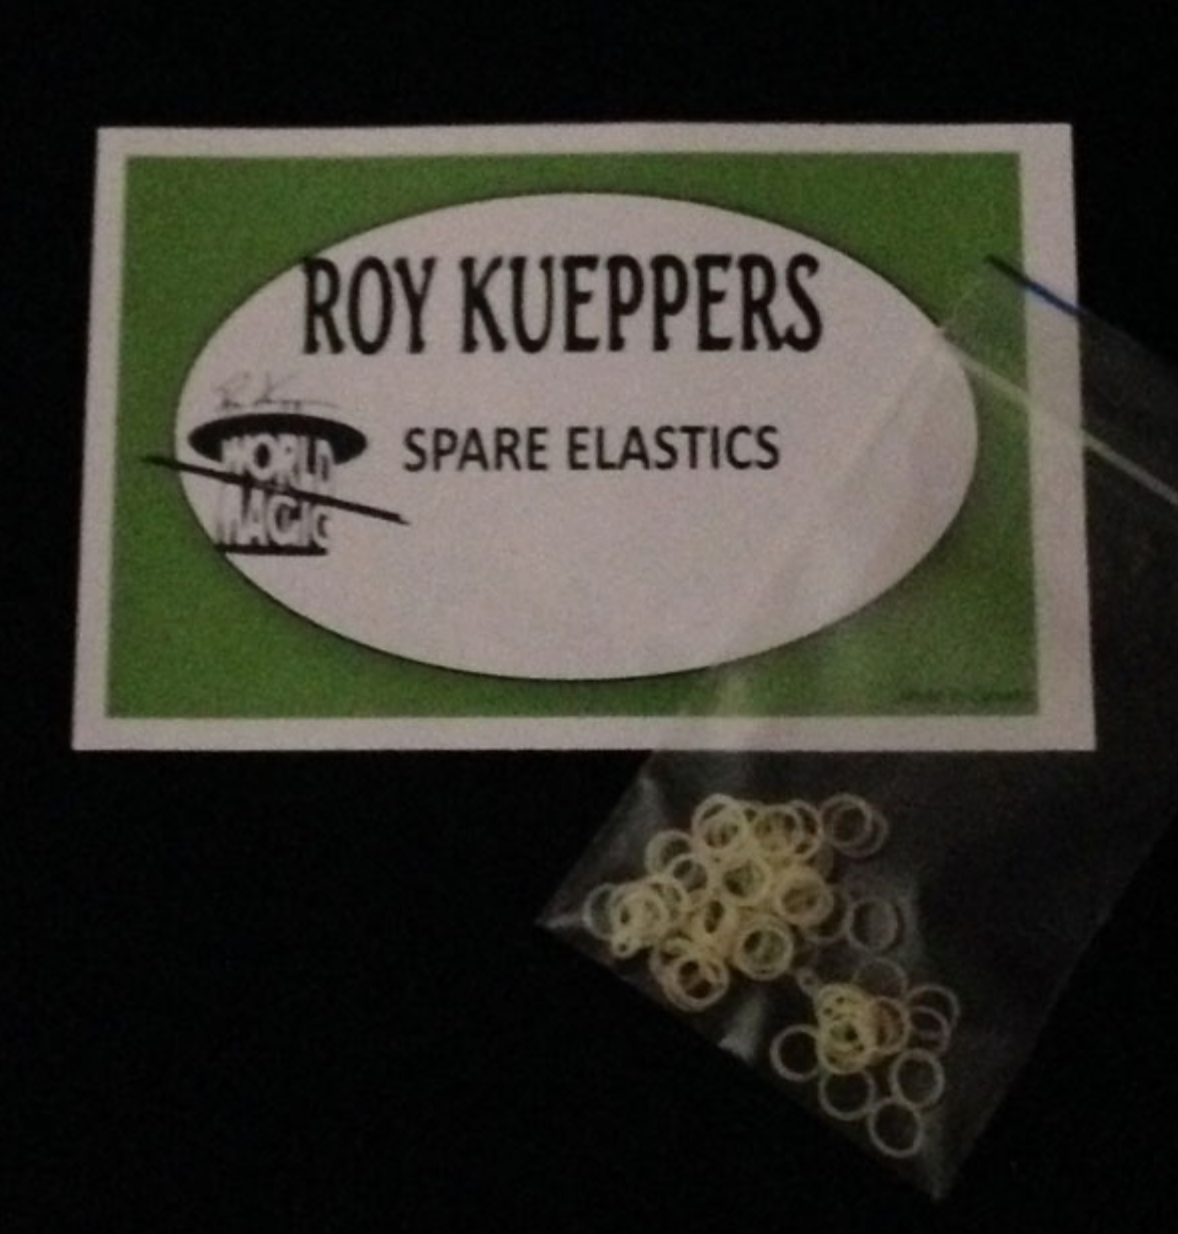 Replacement rubber bands by Roy Kueppers